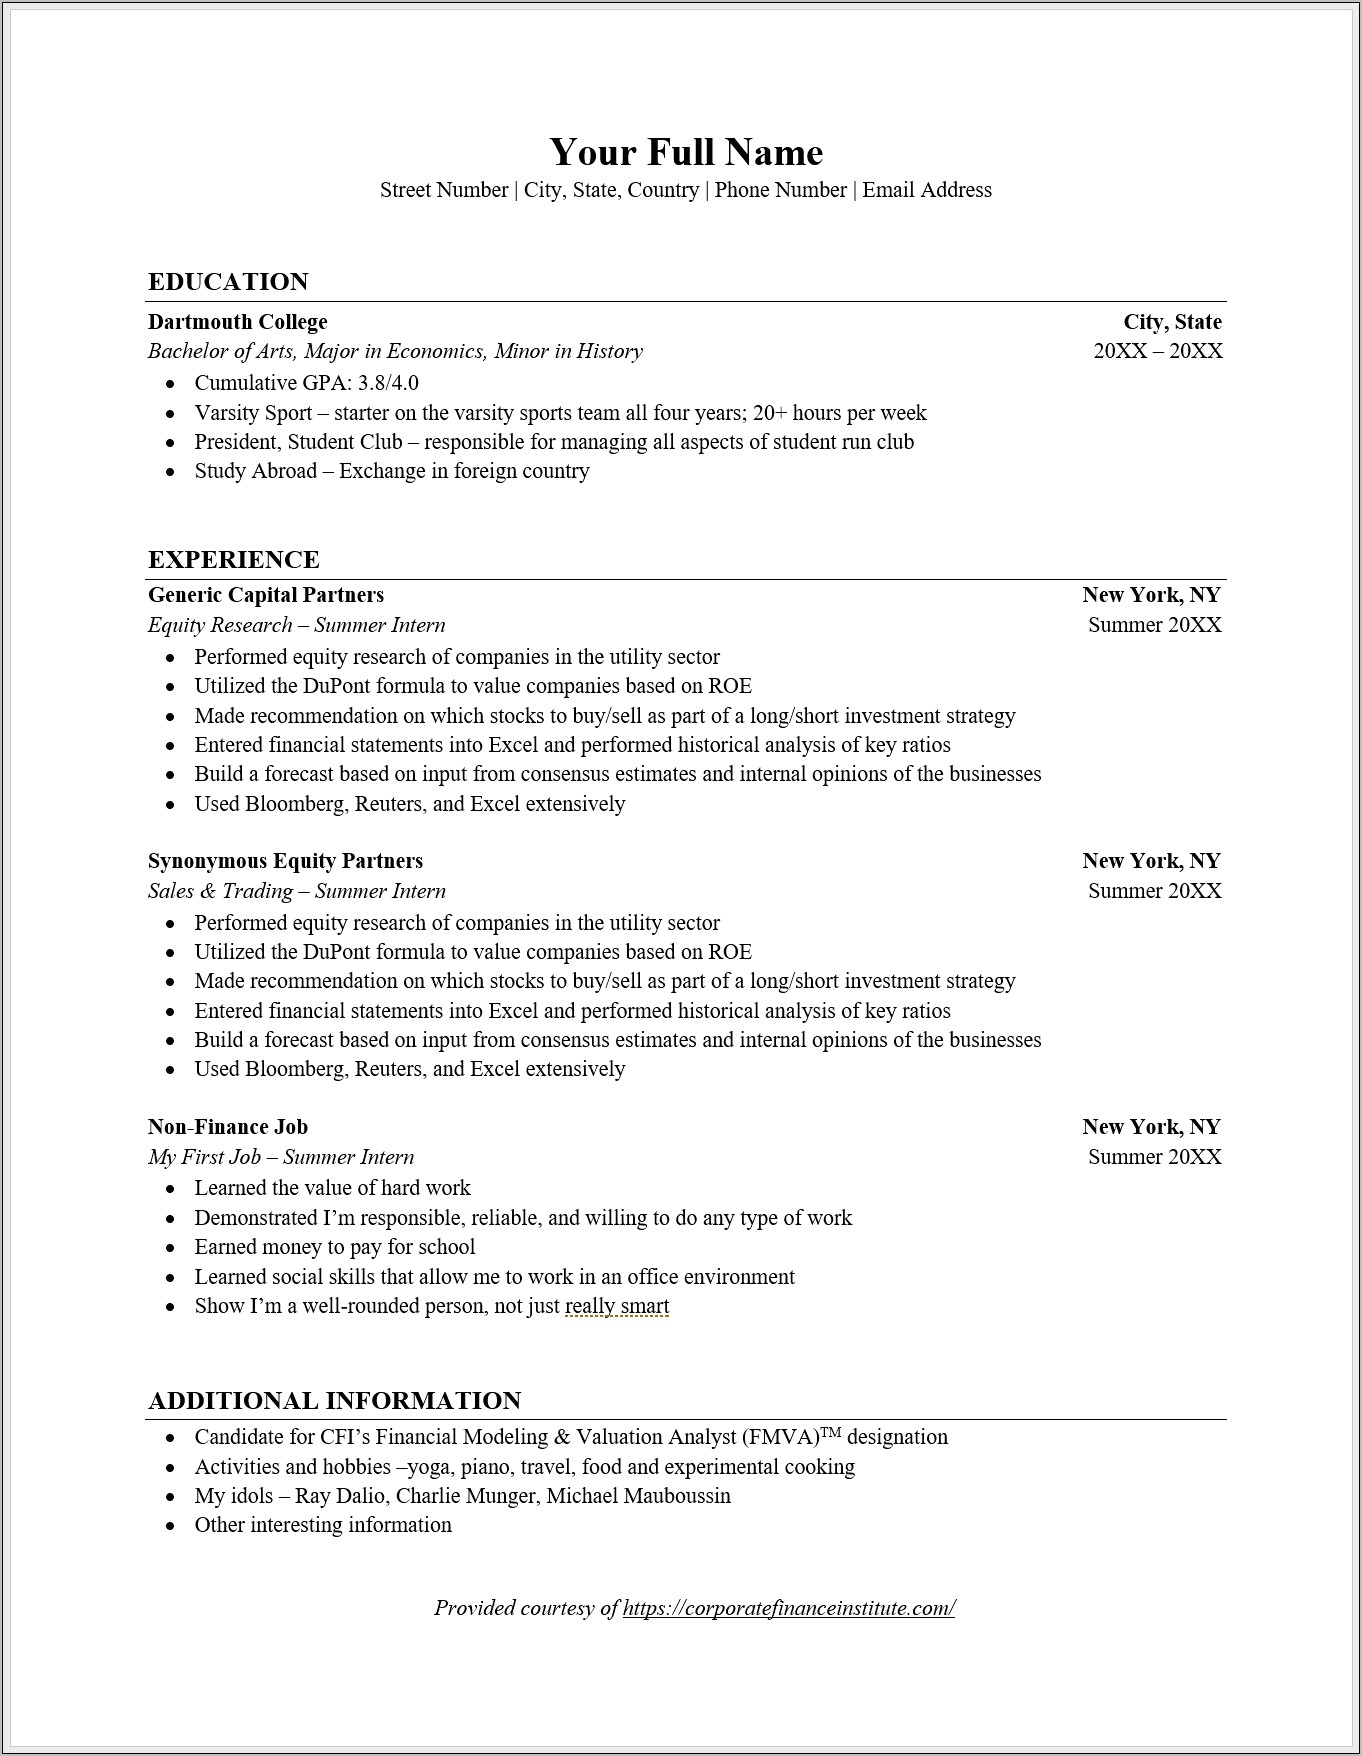 Resume Education Example With Gpa